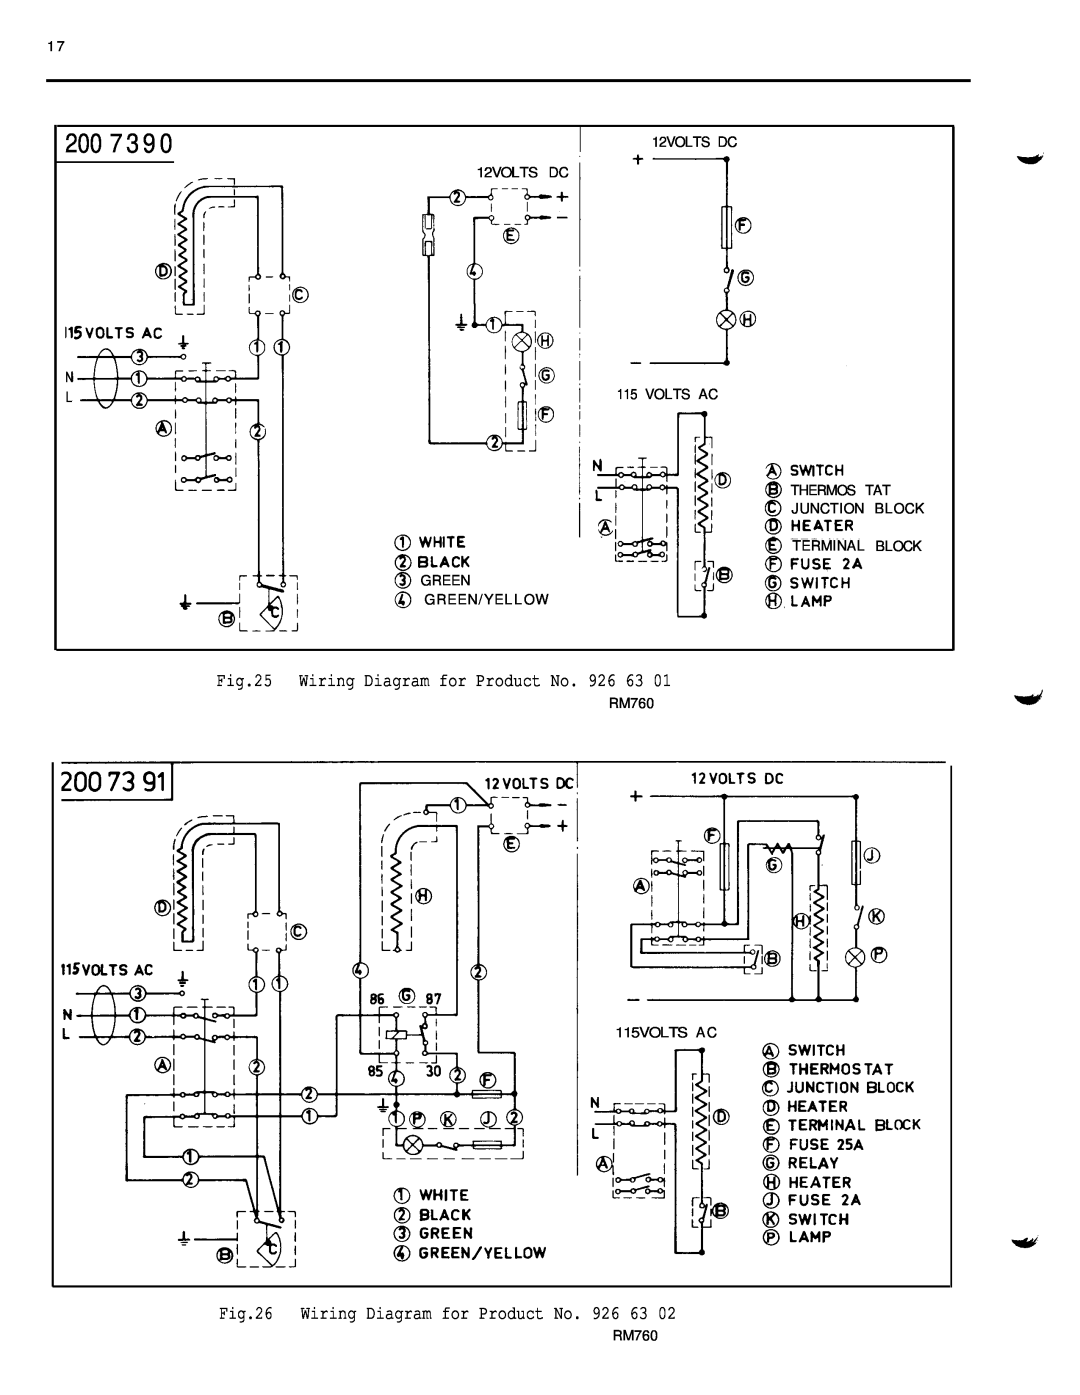 Dometic RM36O 200 7 3, Wiring Diagram for Product No. 926, 12VOLTS DC N L @ GREEN @ G R E E N / Y E L L O W, RM760 